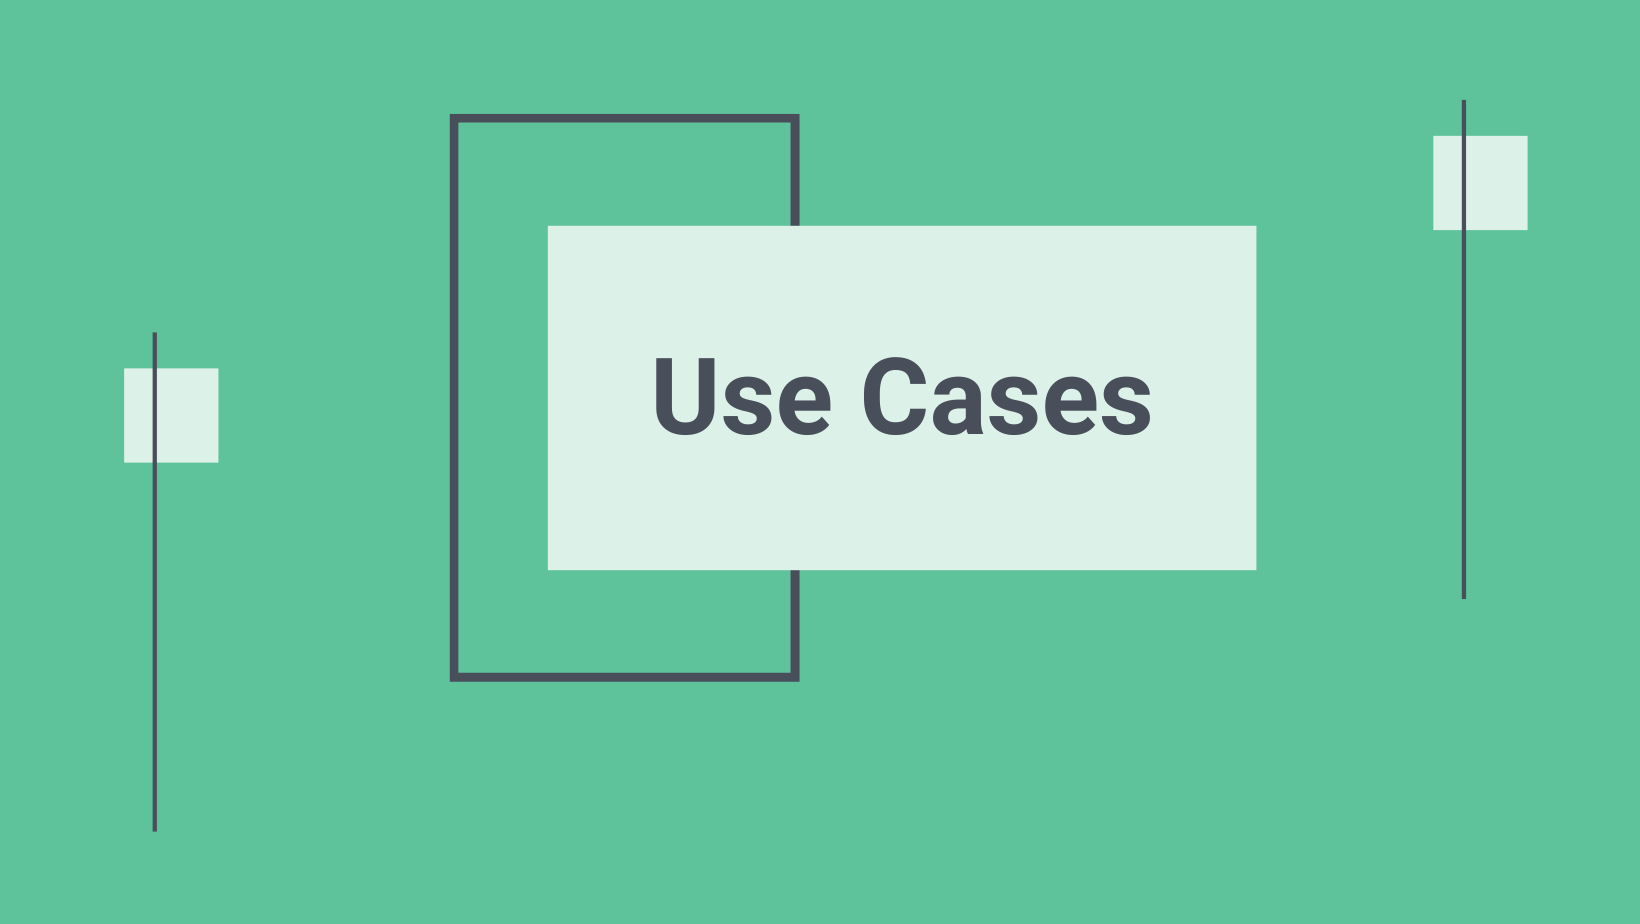 W-2 Forms automation Use Cases